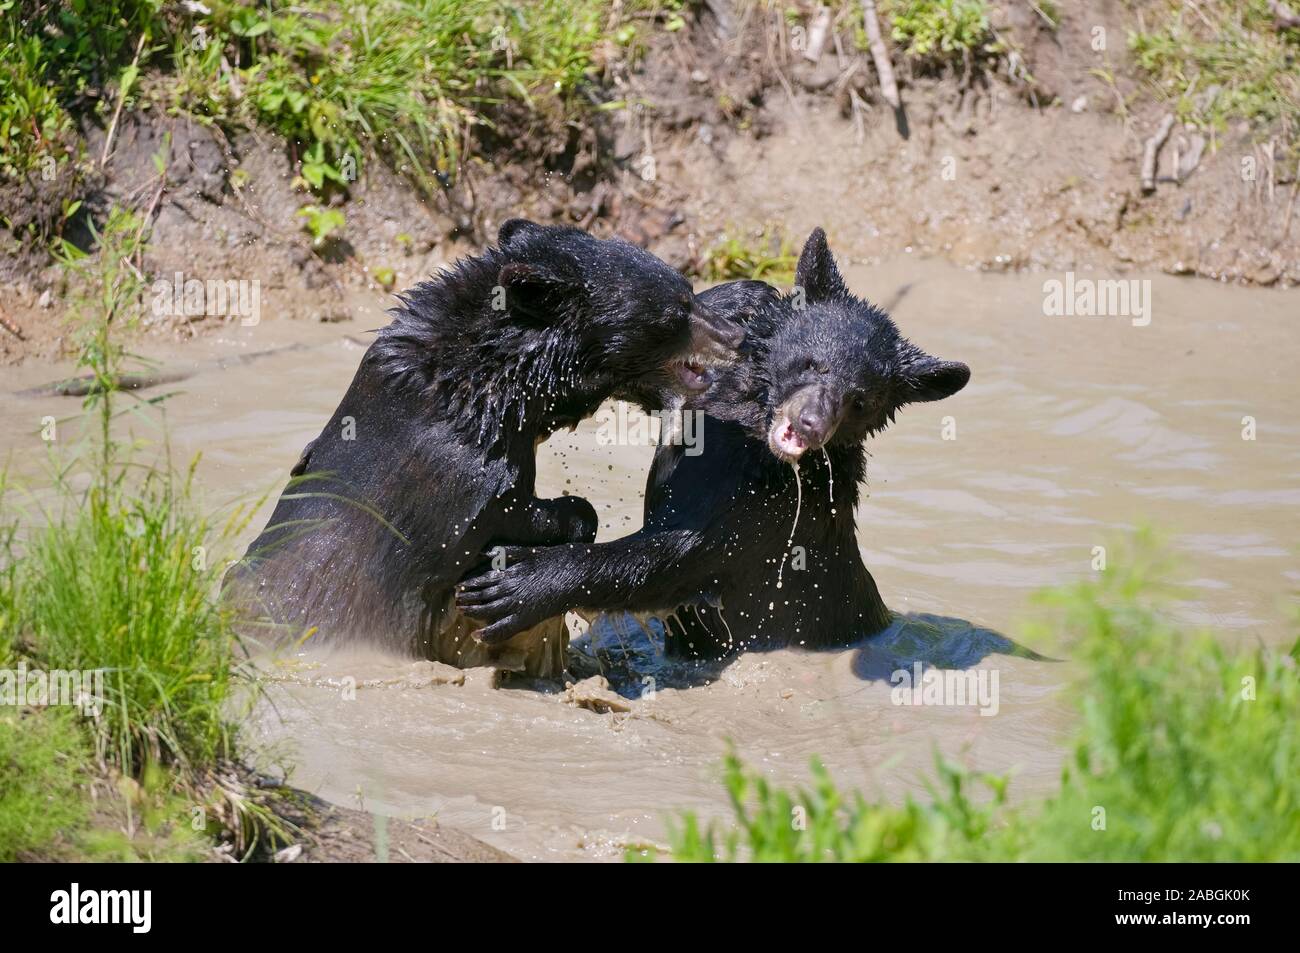 Two Black Bears playing in a muddy water hole. Stock Photo